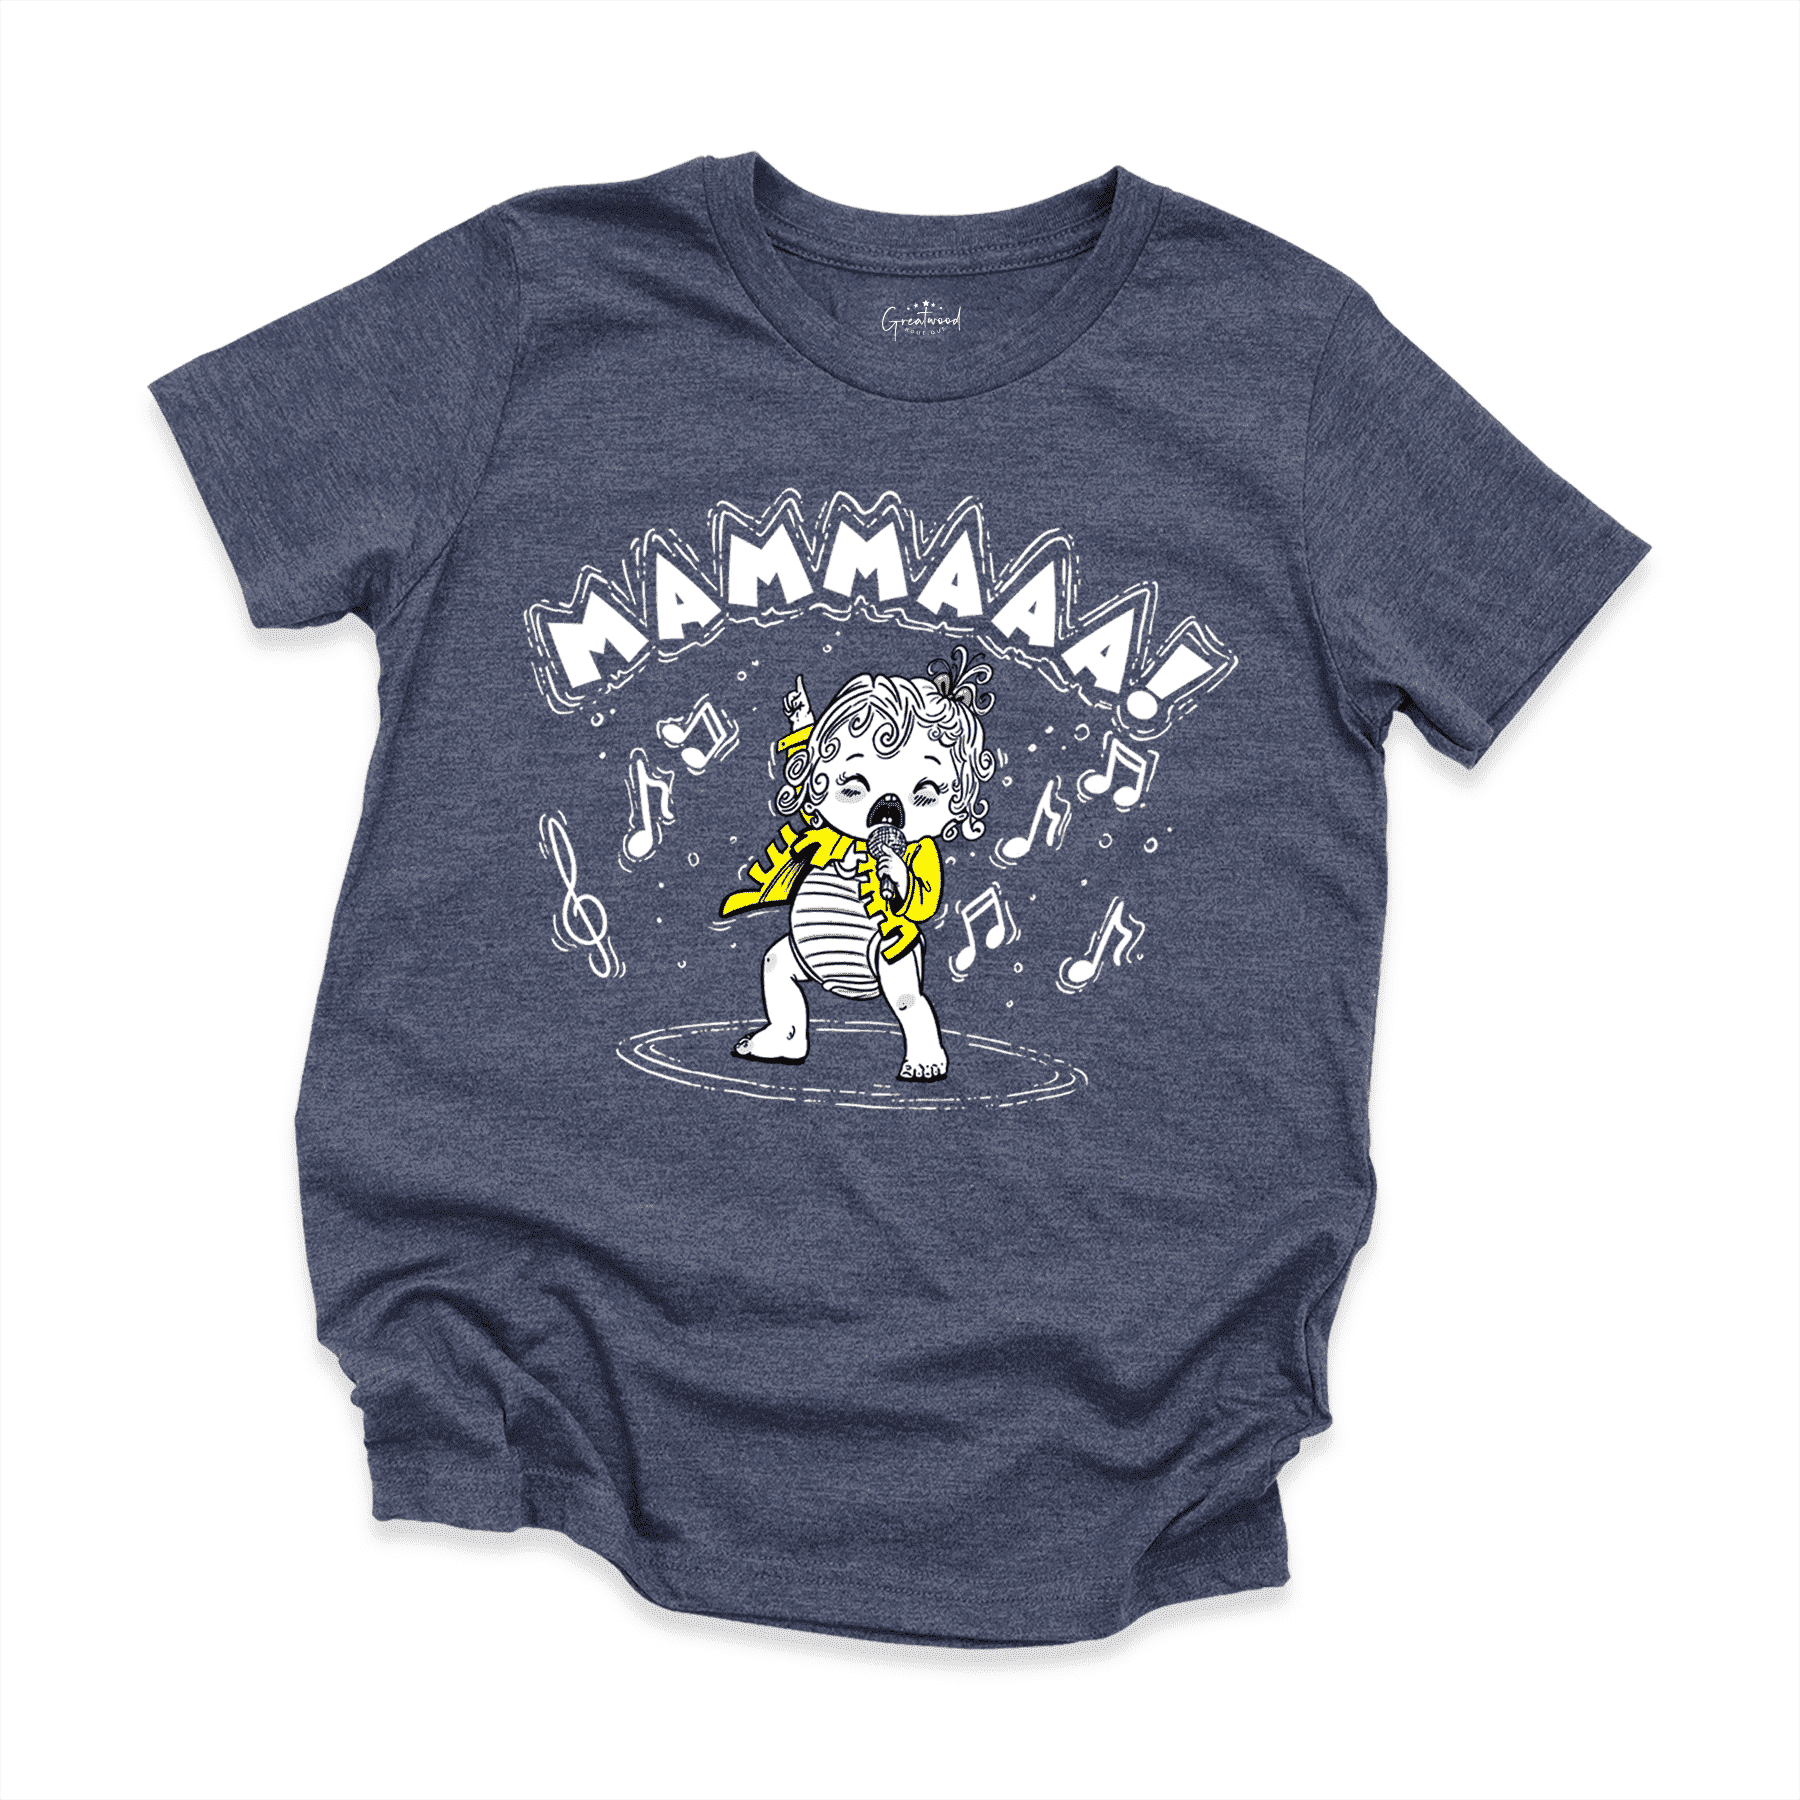 Mammaaa Youth Shirt Navy - Greatwood Boutique